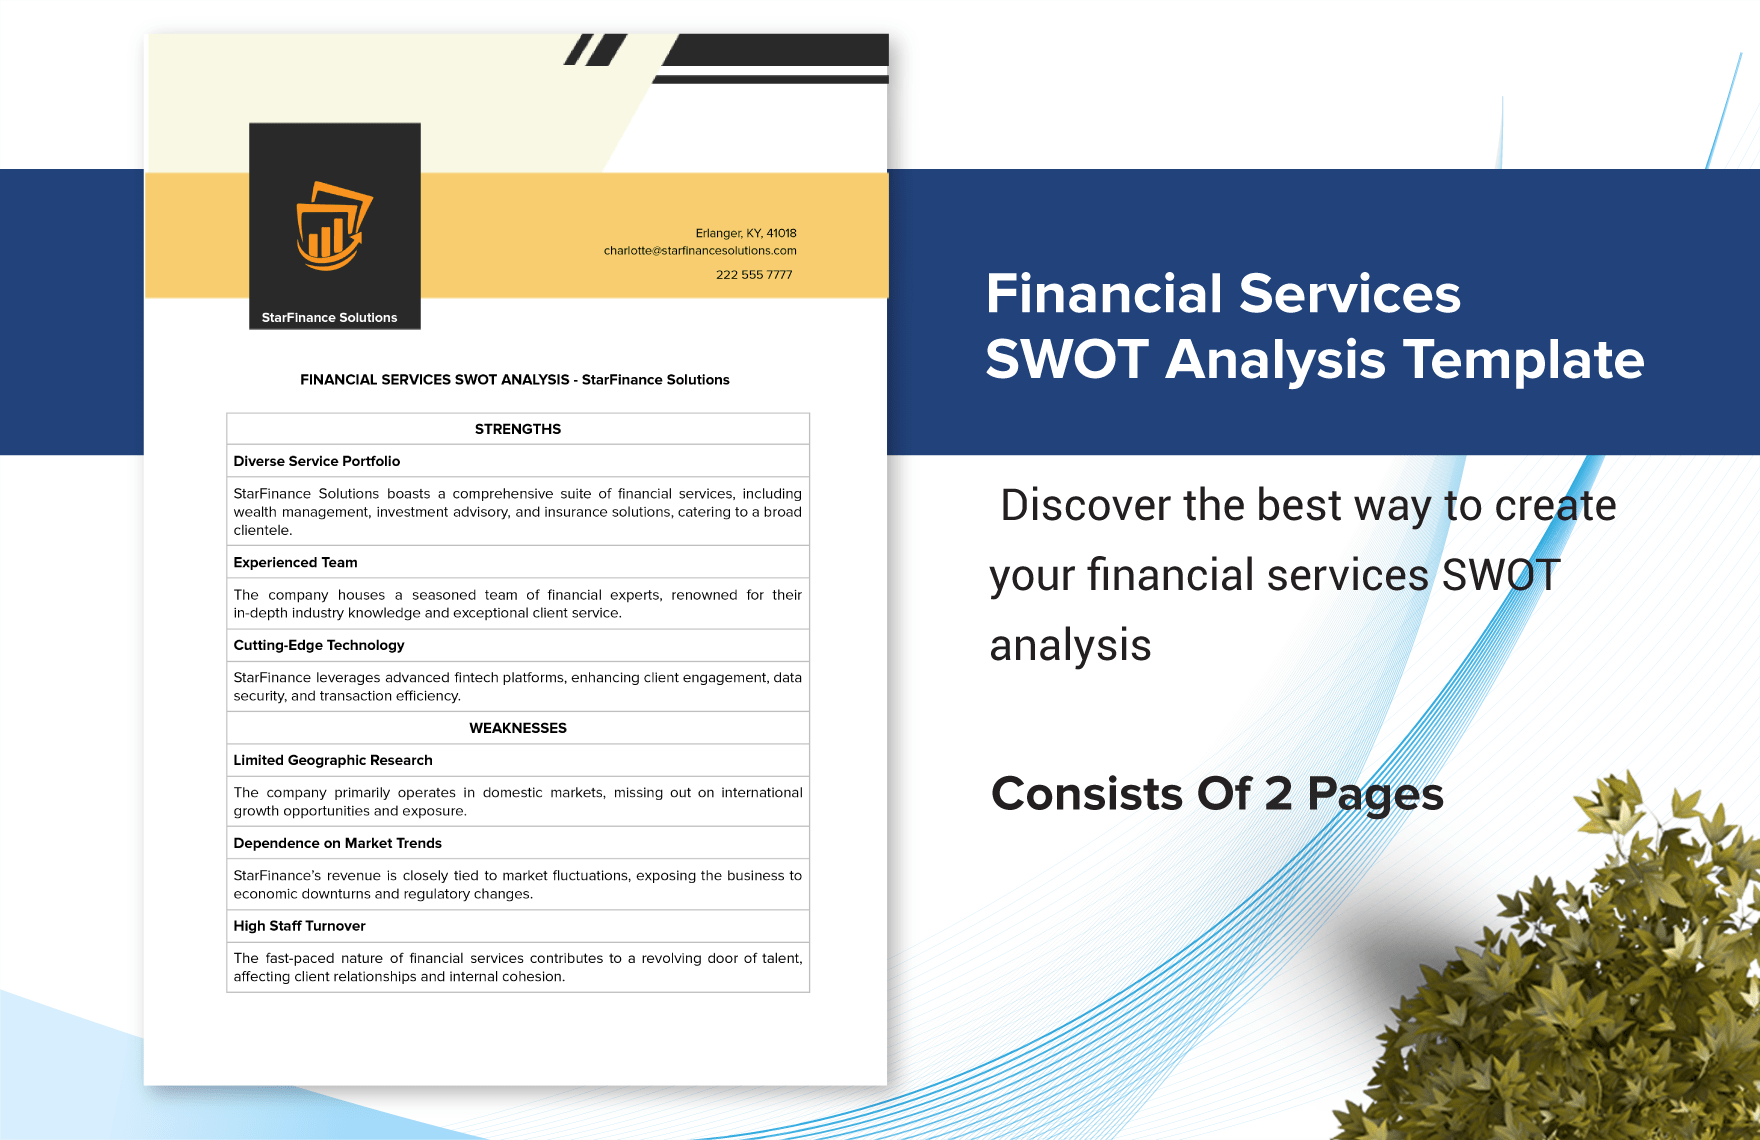 Financial Services SWOT Analysis Template